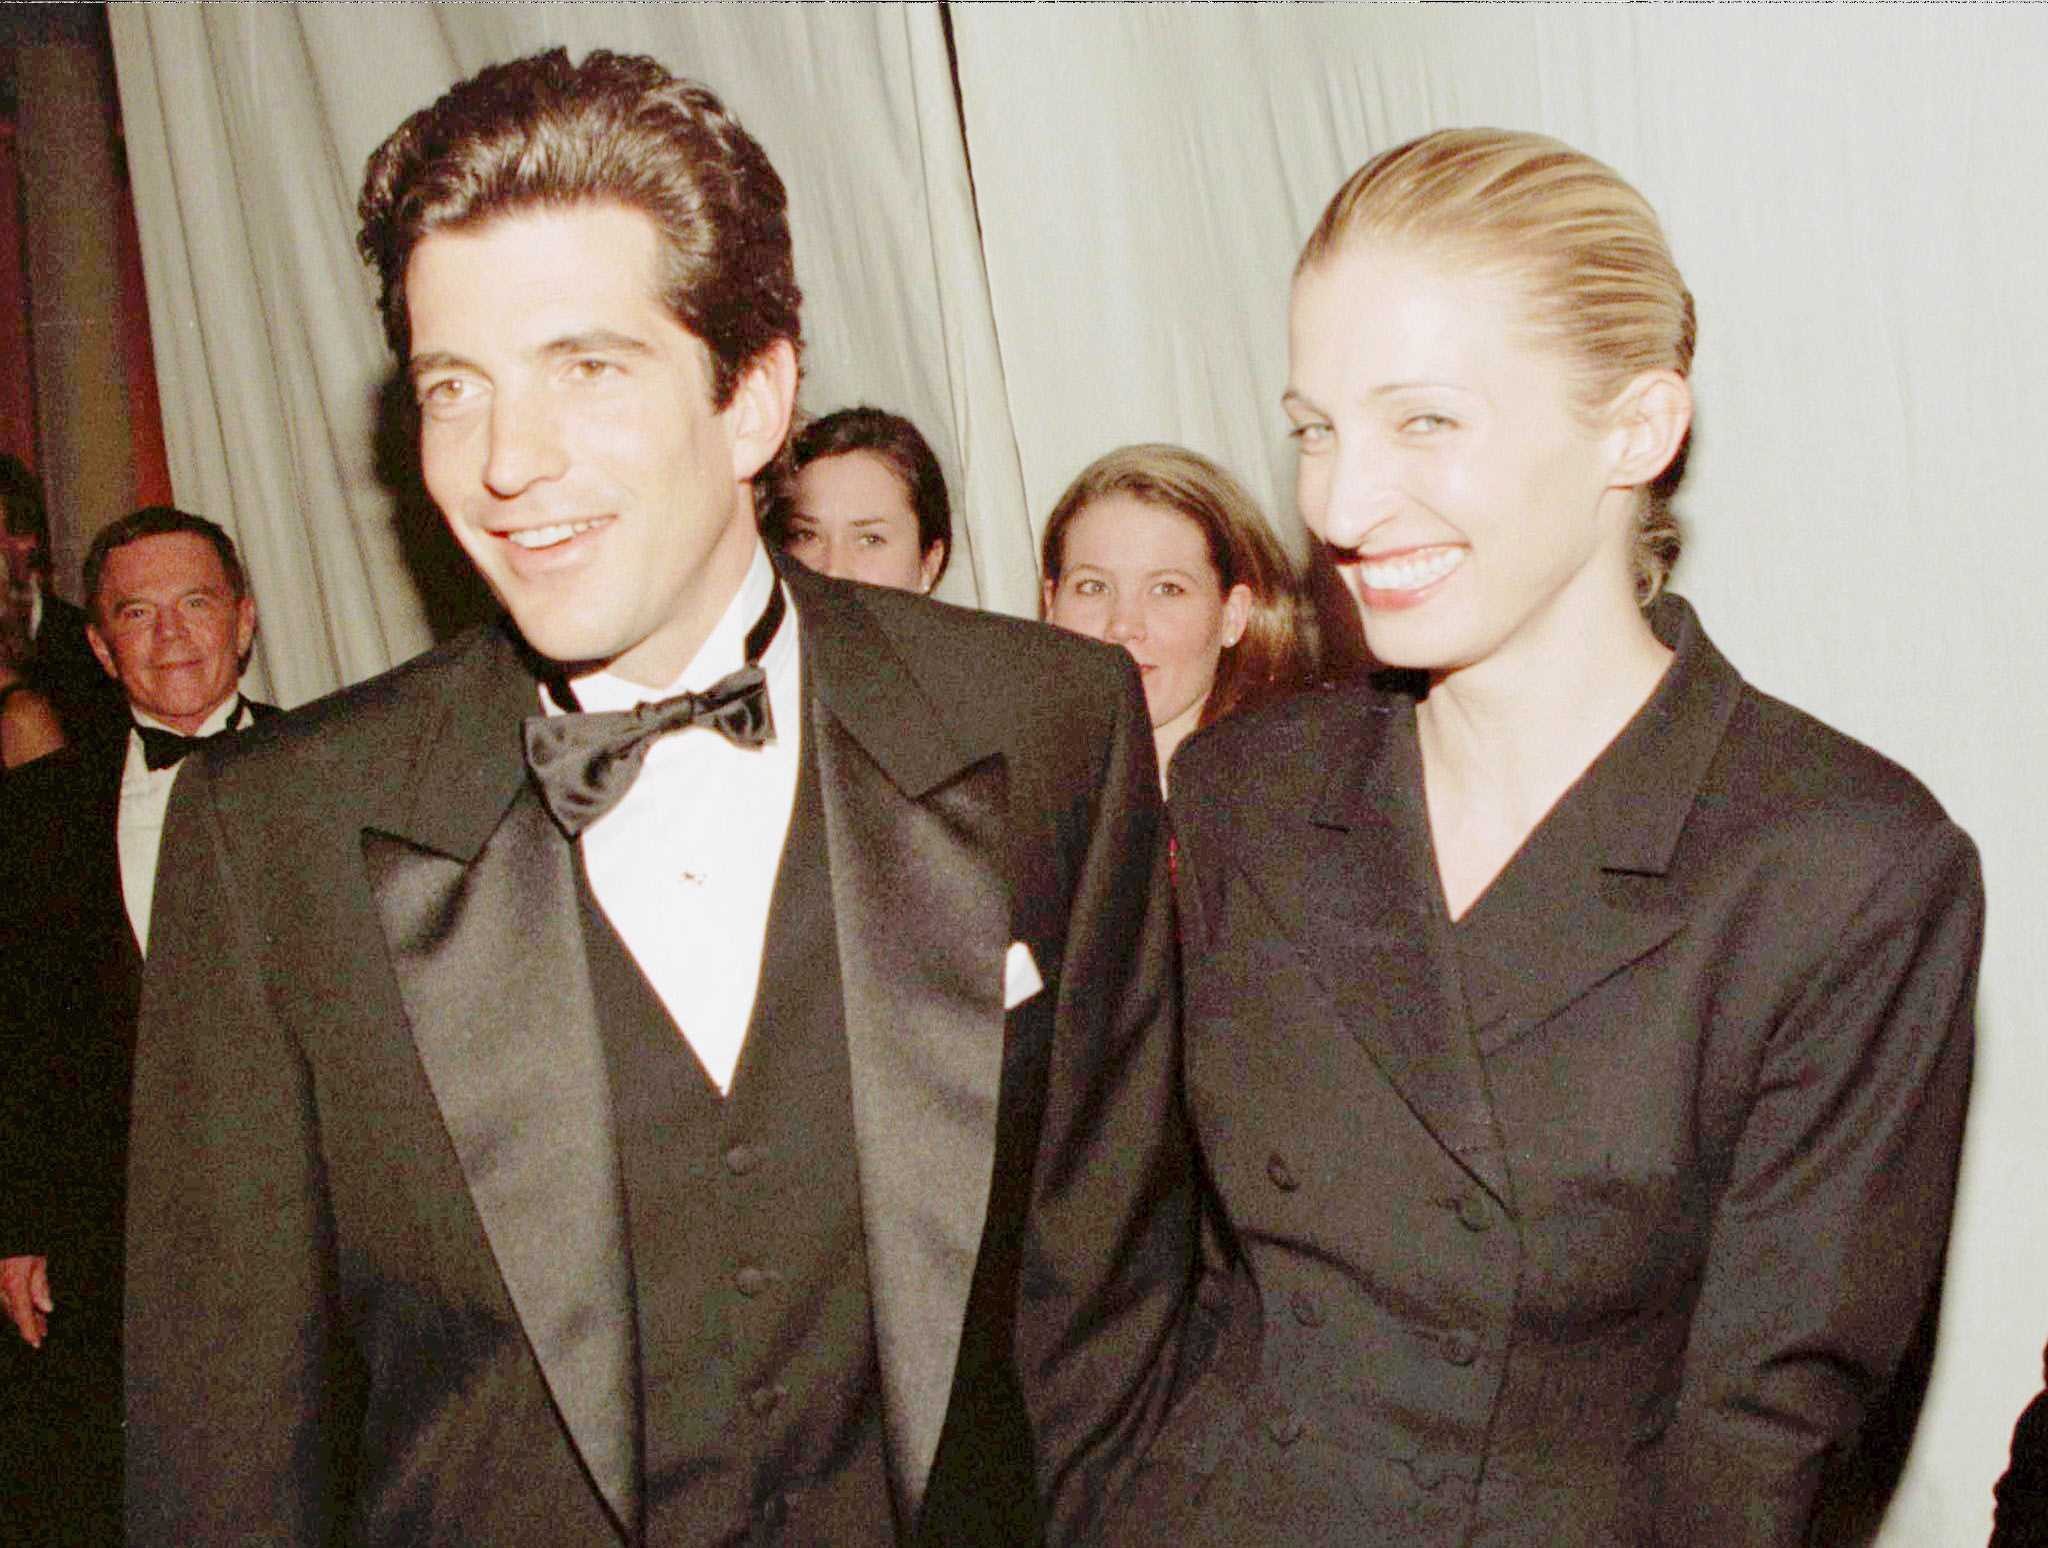 TLC to air exclusive footage from JFK Jr. and Carolyn Bessette’s